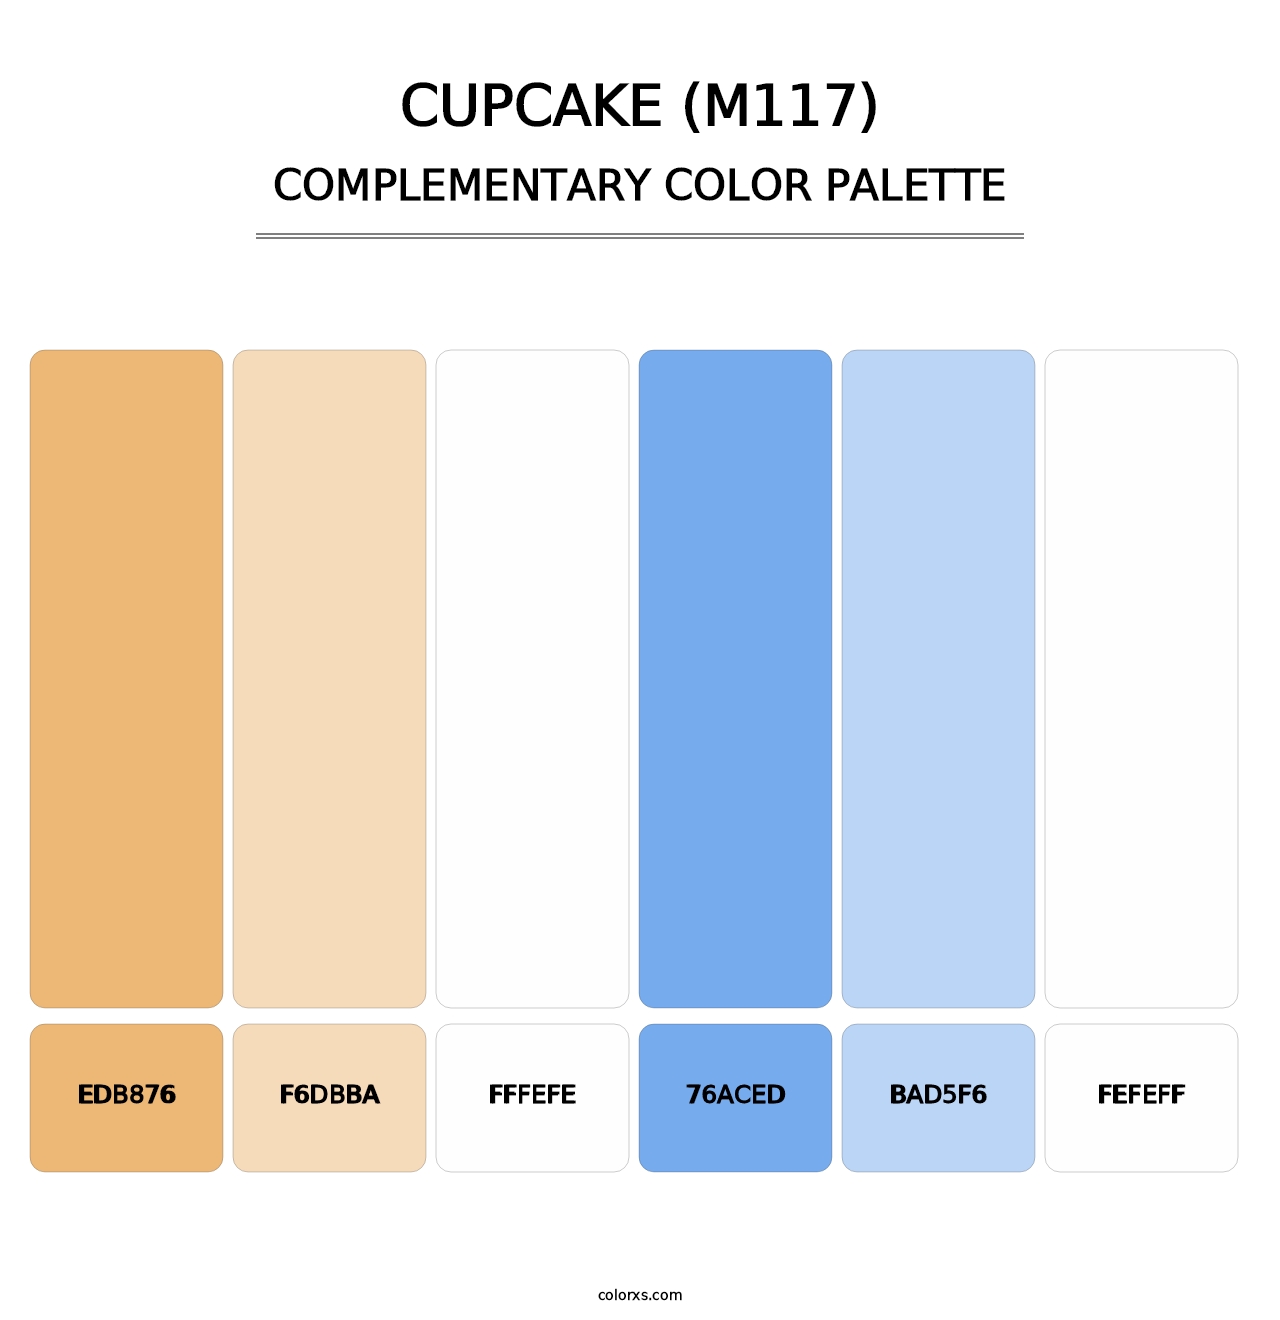 Cupcake (M117) - Complementary Color Palette